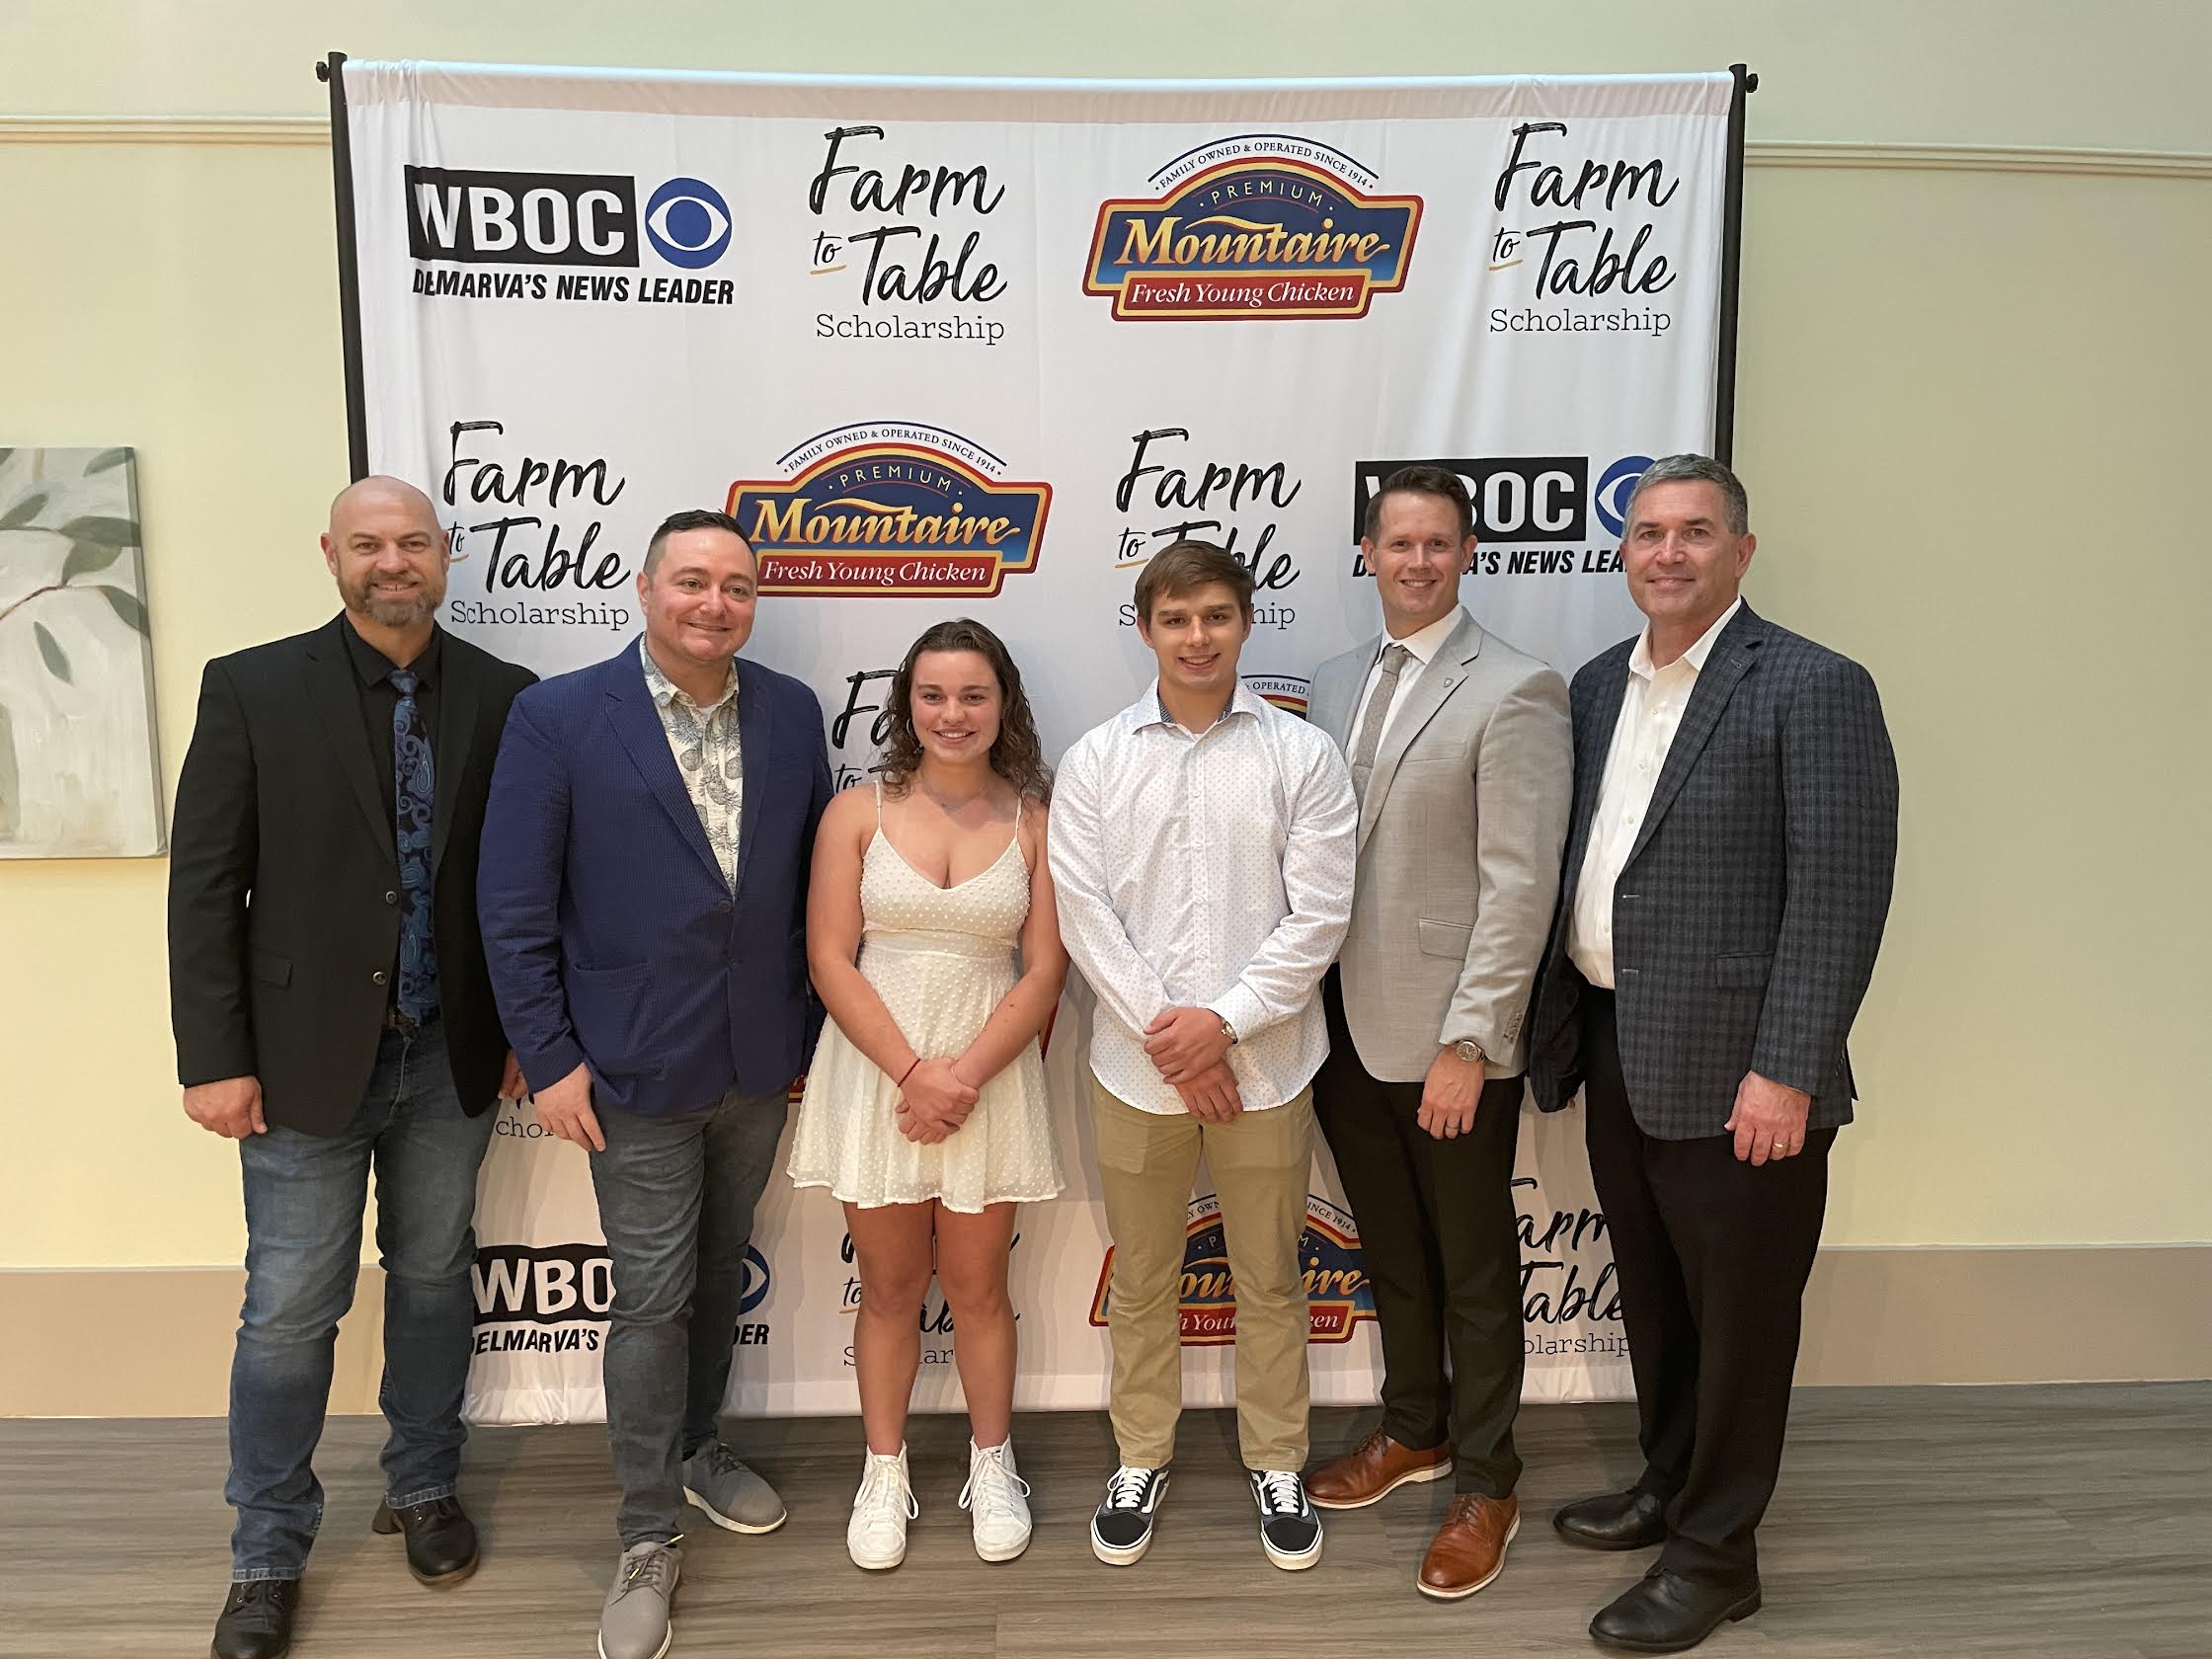 From left: Outdoors Delmarva Host Jason Lee, Delaware celebrity chef Hari Cameron, join overall Farm to Table agriculture scholarship winners Samantha Teoli and Aidan Bell, Mountaire Community Relations Manager Zach Evans and Mountaire President Phillip Plylar.